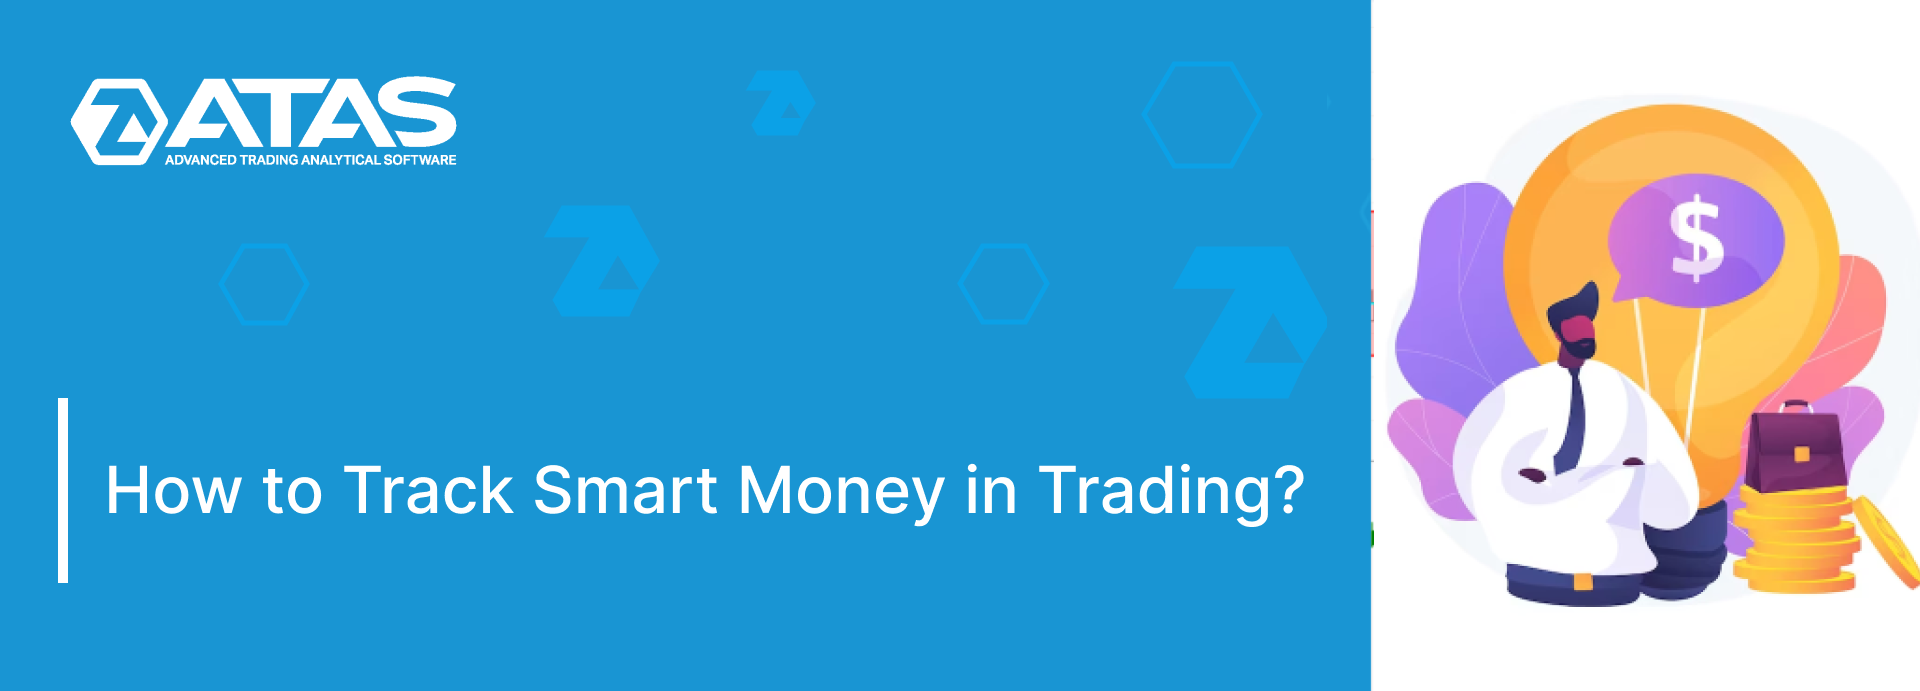 How to Track Smart Money in Trading?